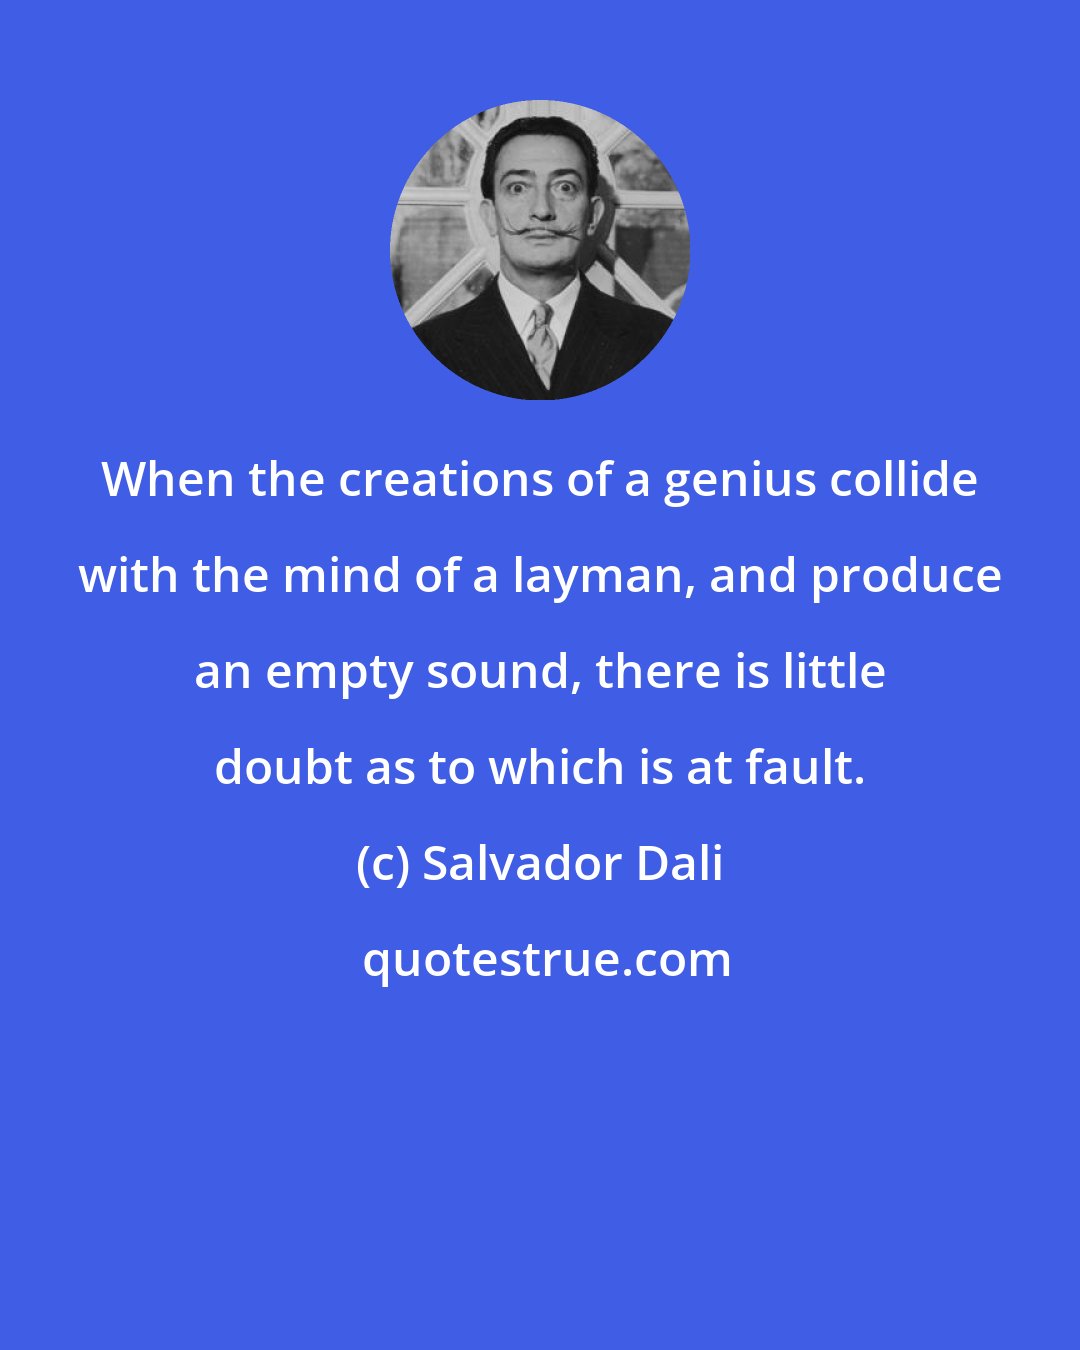 Salvador Dali: When the creations of a genius collide with the mind of a layman, and produce an empty sound, there is little doubt as to which is at fault.